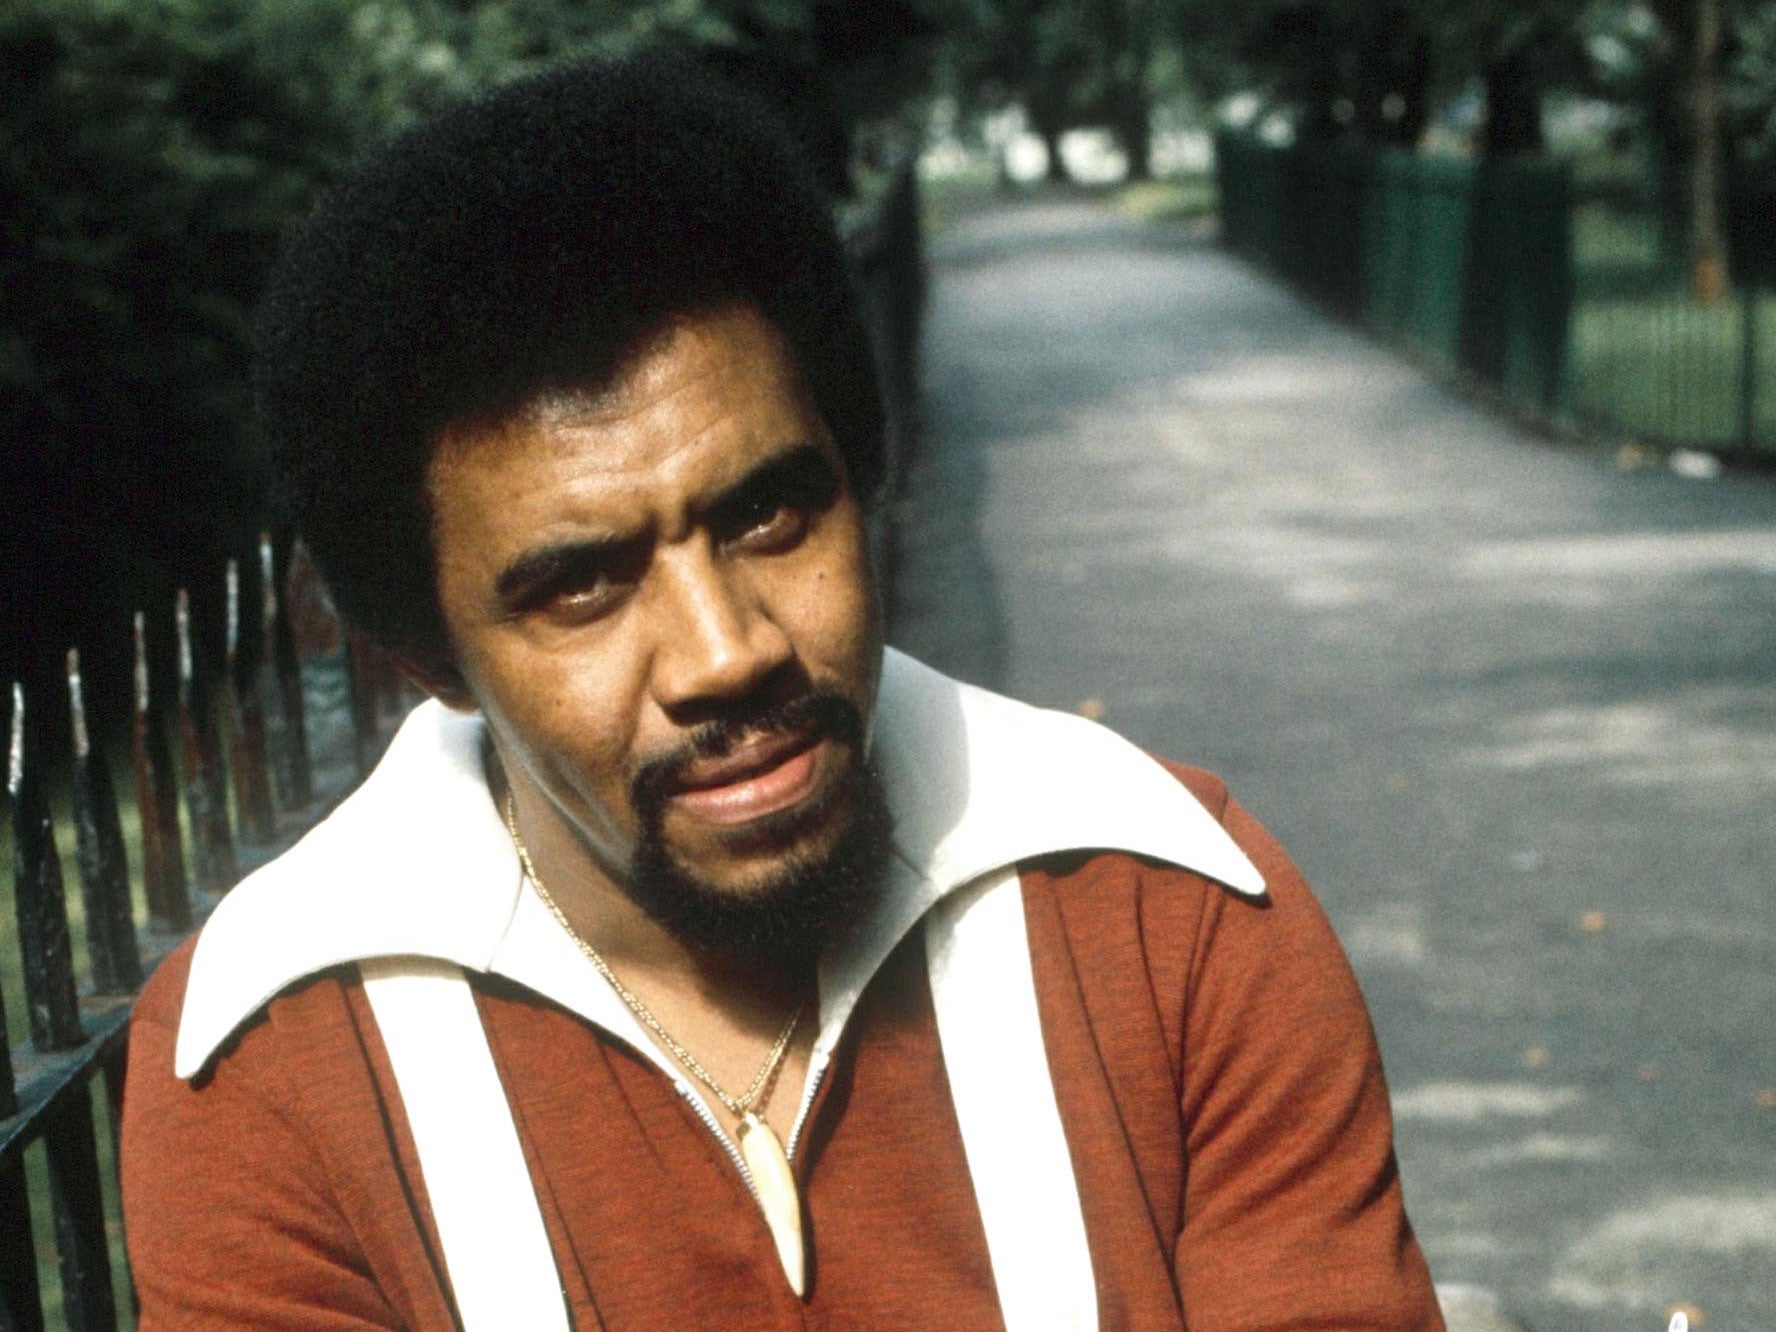 The late Jimmy Ruffin, pictured in 1974